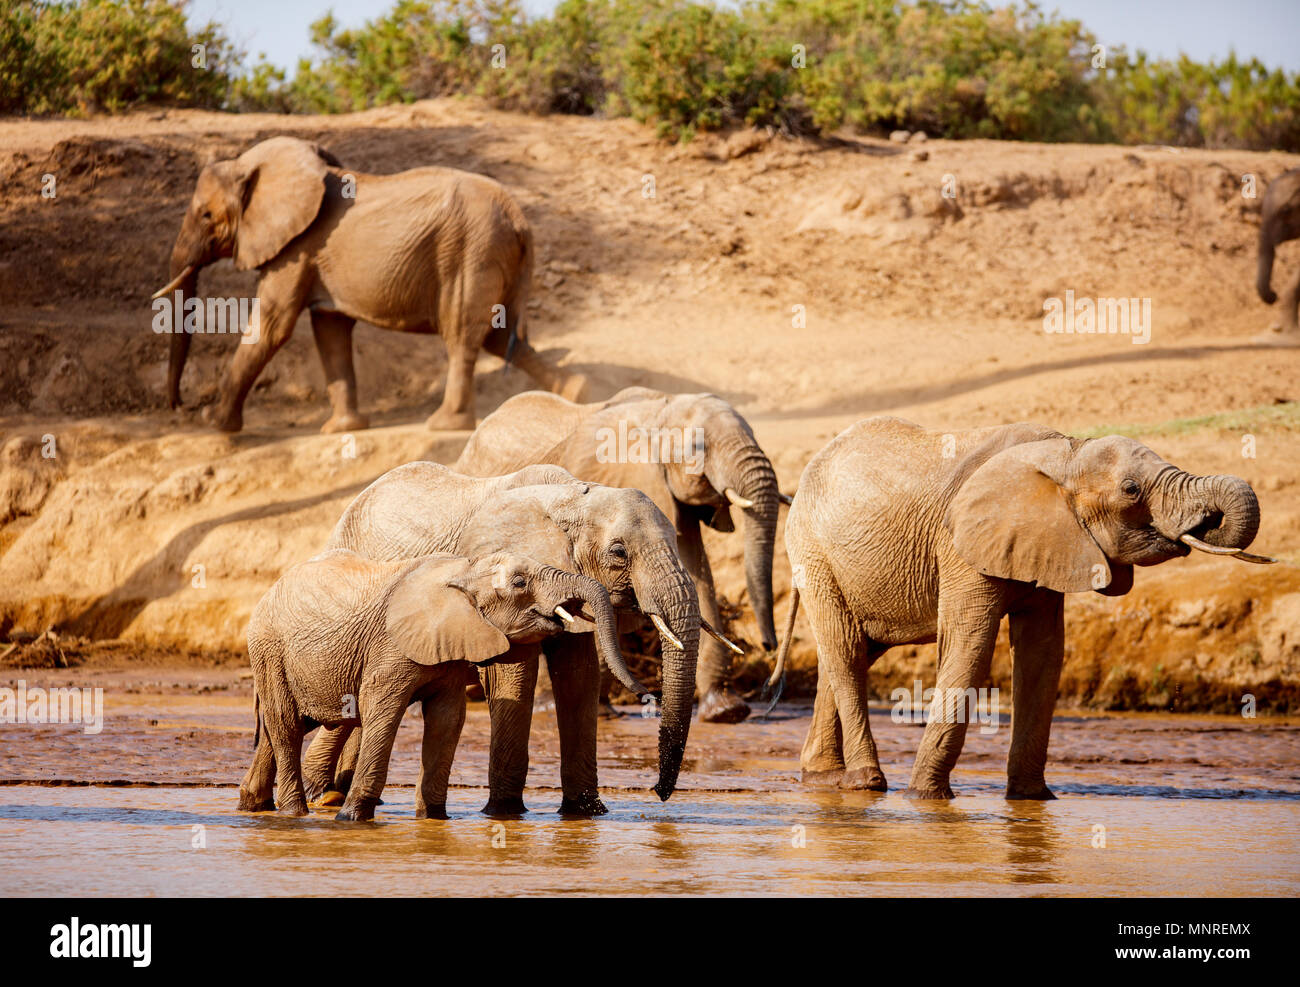 Wild elephants at riverbed drinking water Stock Photo